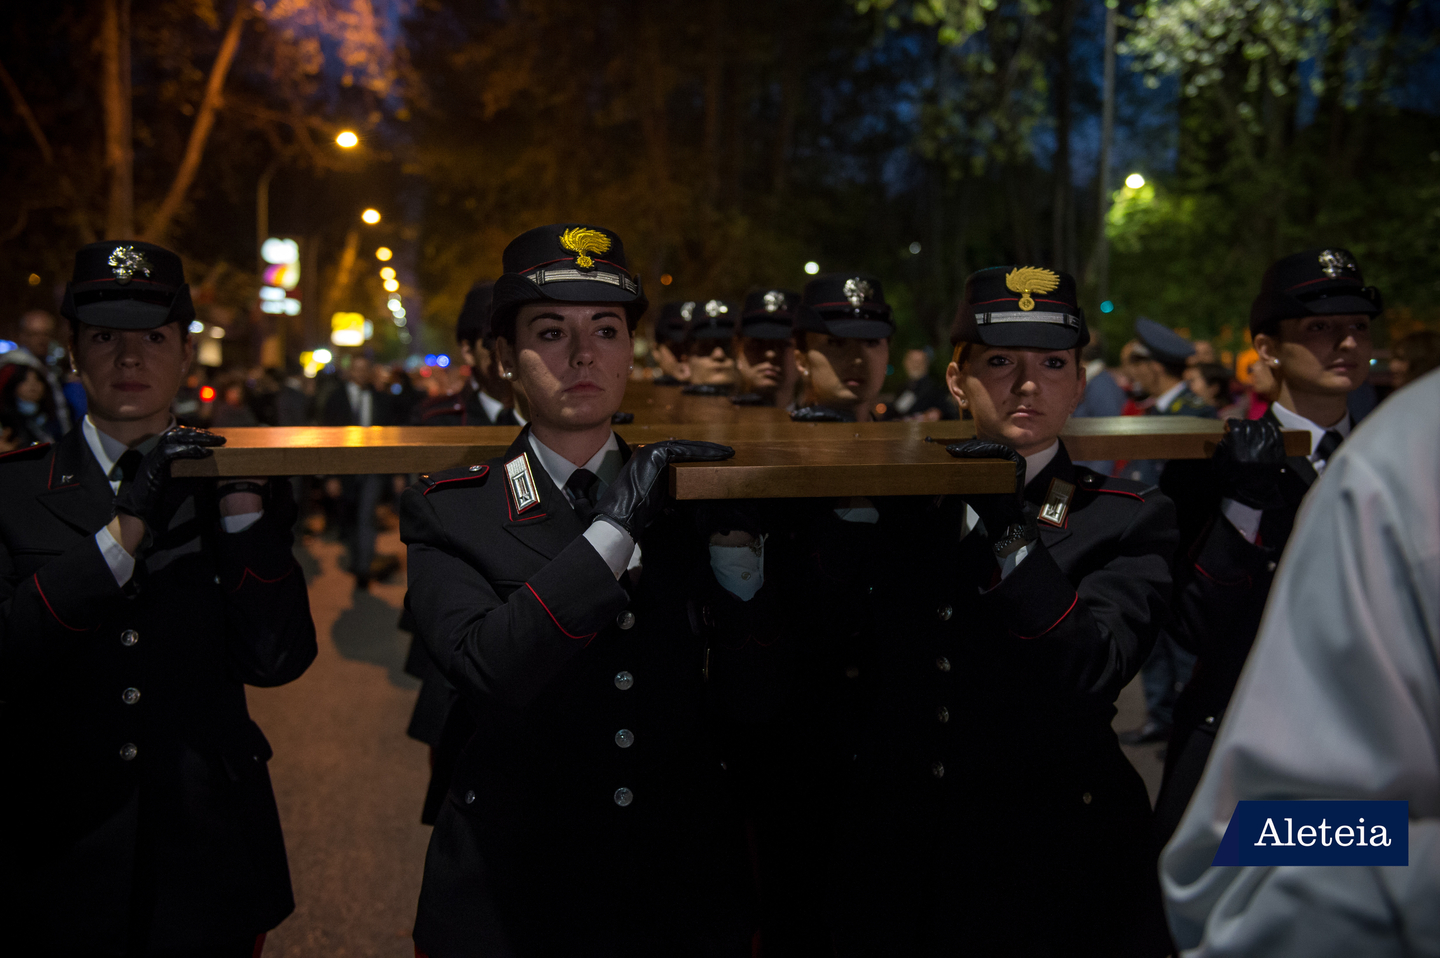 Women of Carabinieri corps carry the cross during via Crucis for